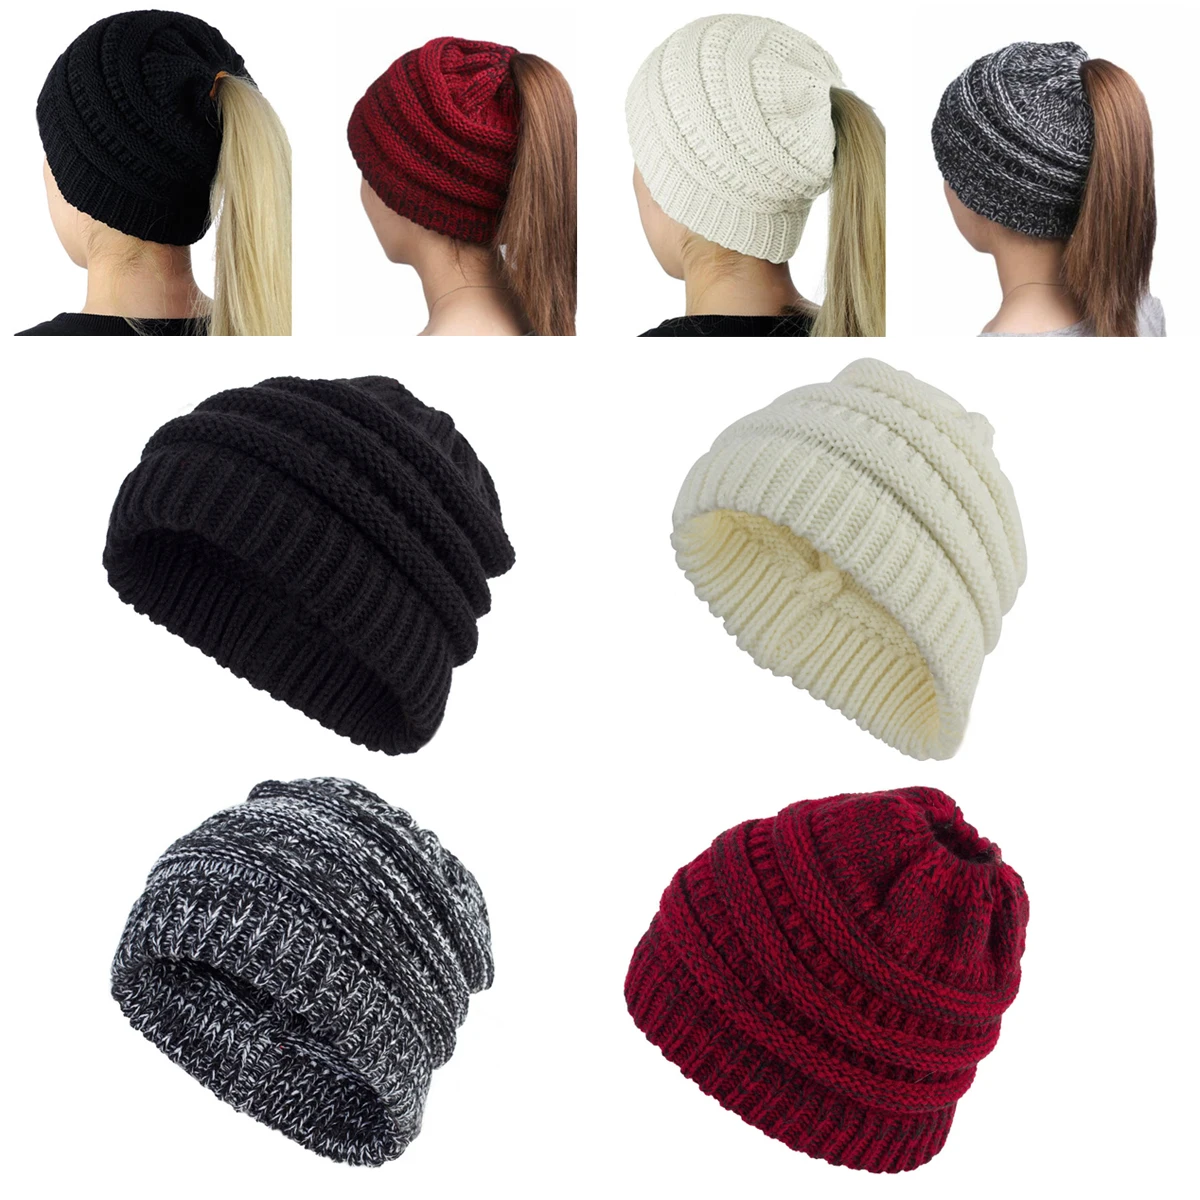 

Ladies Ponytail Knitted Wool Hat Europe and the United States Autumn and Winter Multi-coloured Pullover Cap Elastic Skull Cap